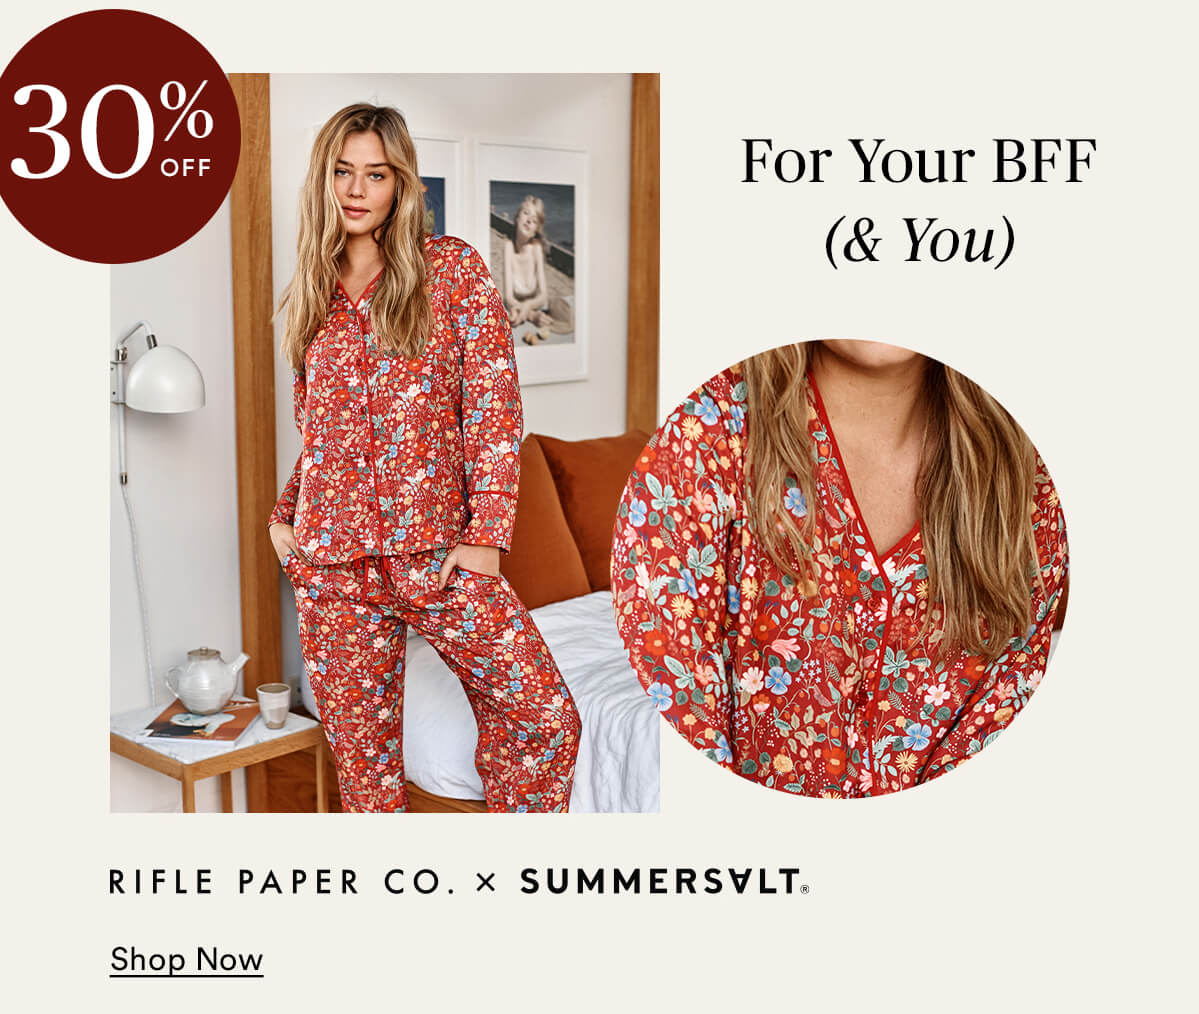 30% off Rifle Paper Co and Summersalt PJs for your BFF and you